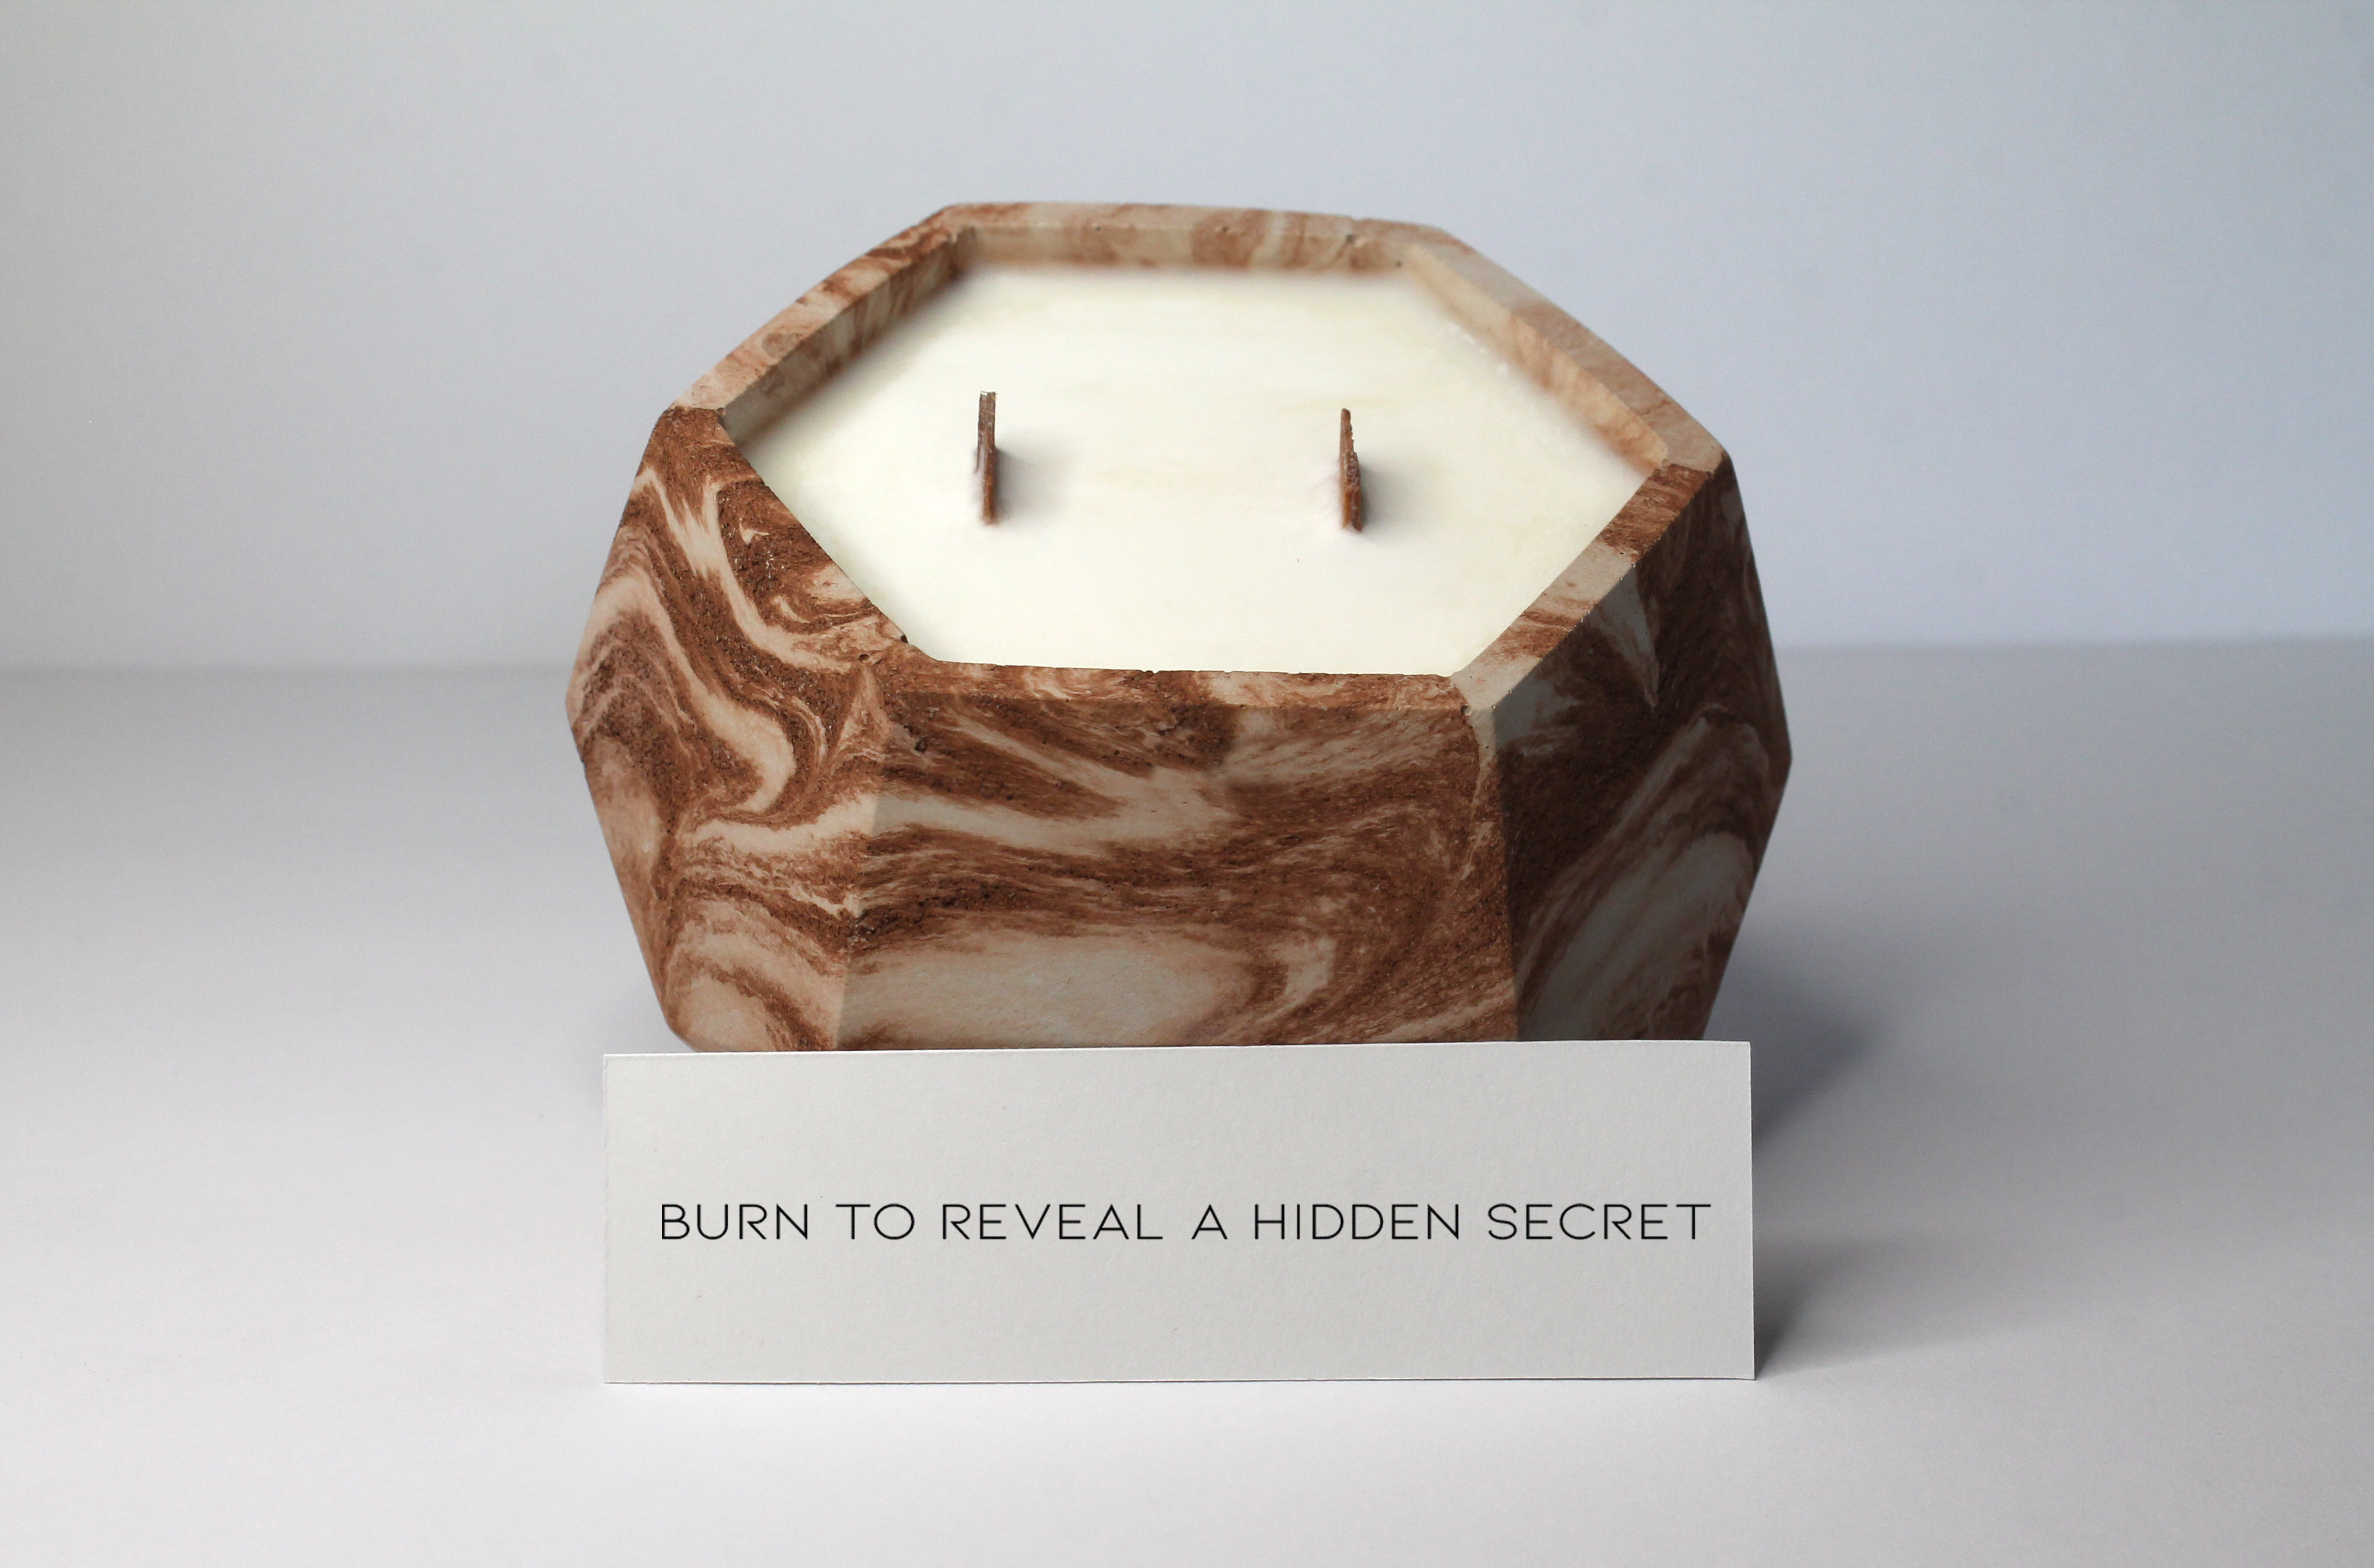 Hidden inside each candle is a confession sent in by strangers from around the world. Burn to reveal a hidden secret.